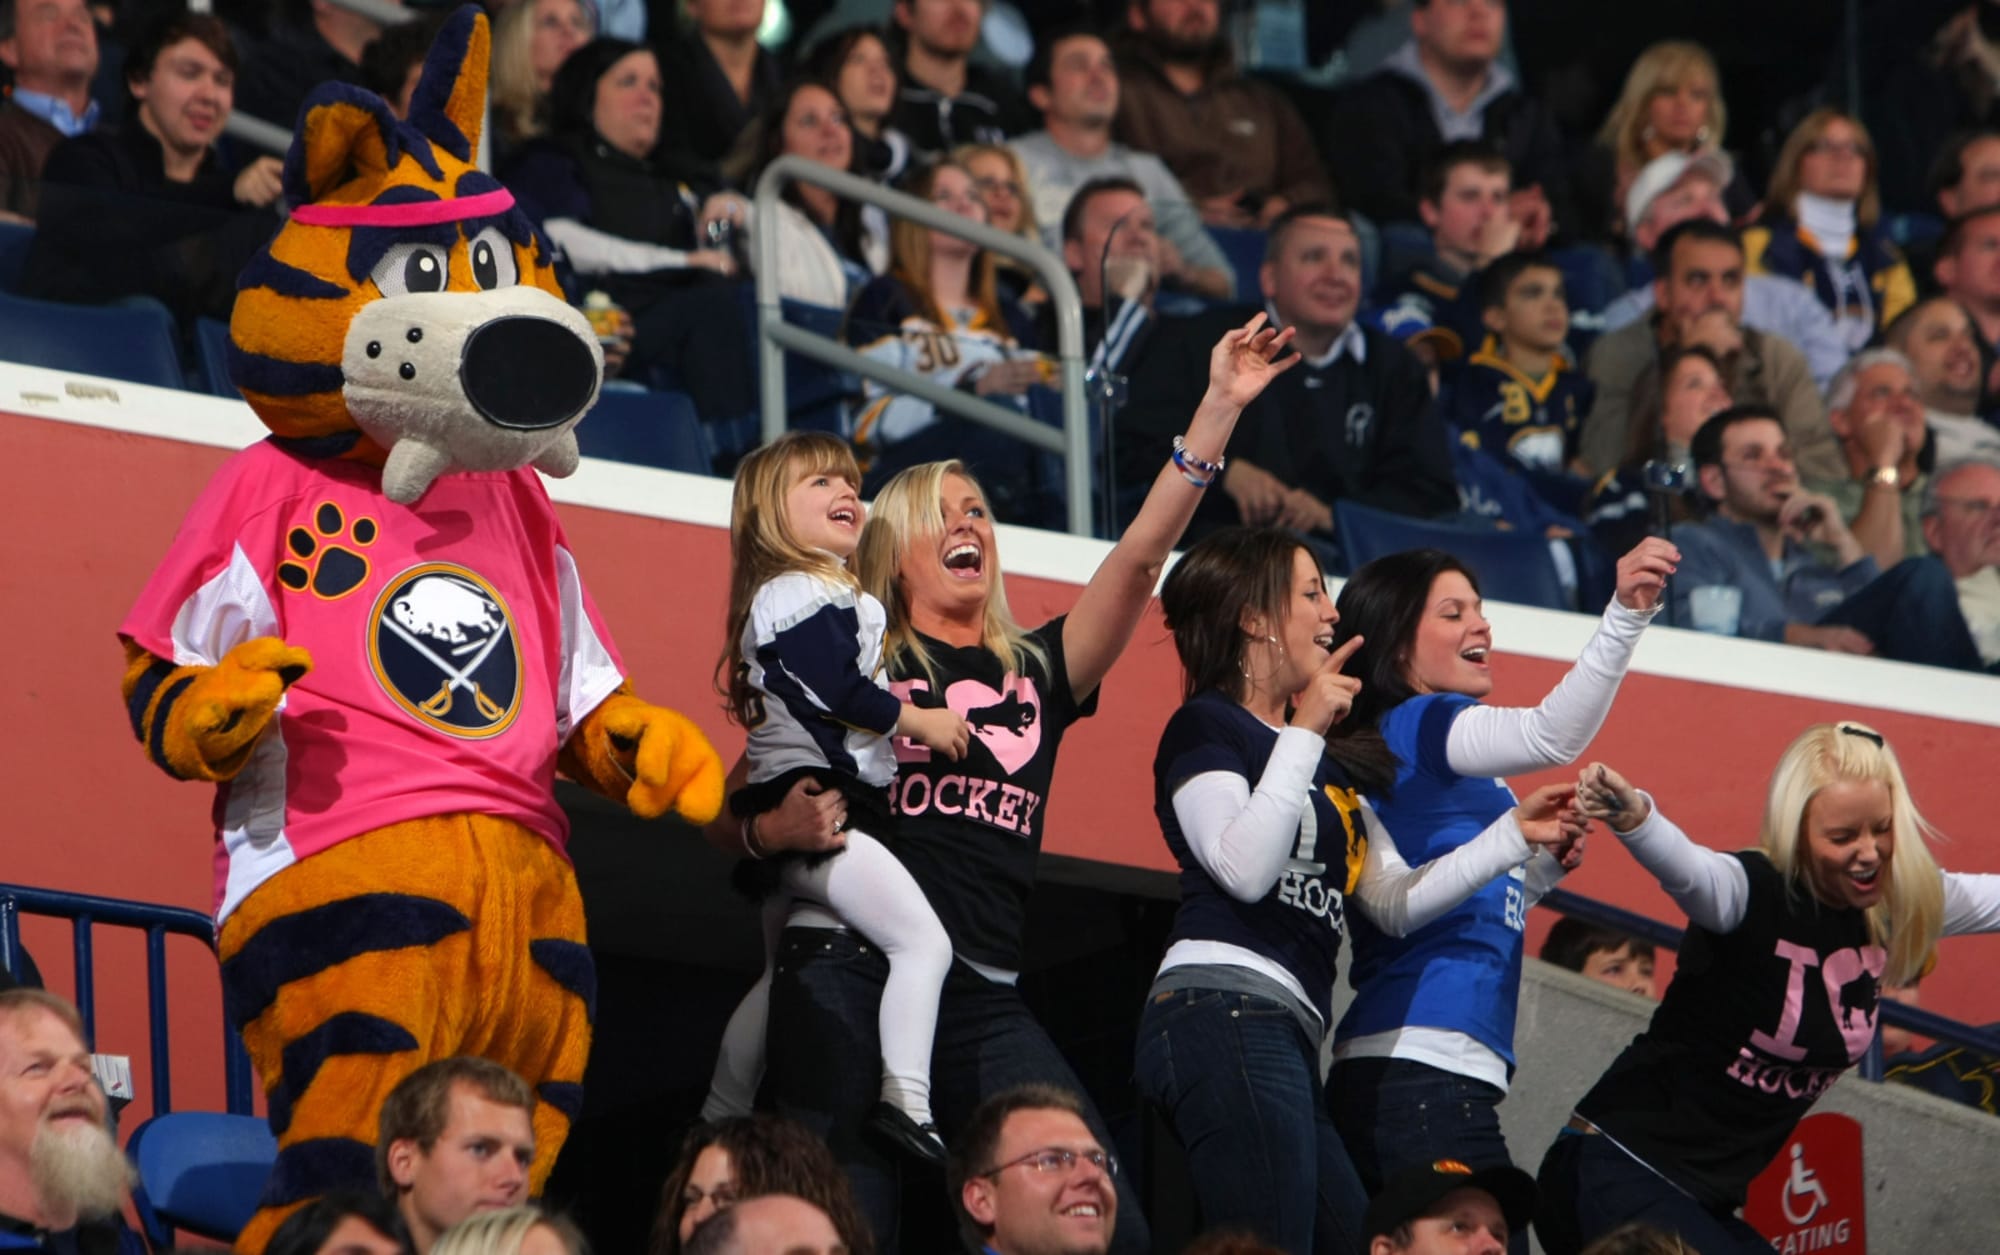 Buffalo Sabres - Tooth has something special planned tonight! Get to the  game early & don't miss: 🔹Pennant Giveaway 🔹Alumni Autographs 🔹Pregame  Ceremony 🔹Sabretooth Shenanigans #Sabres50